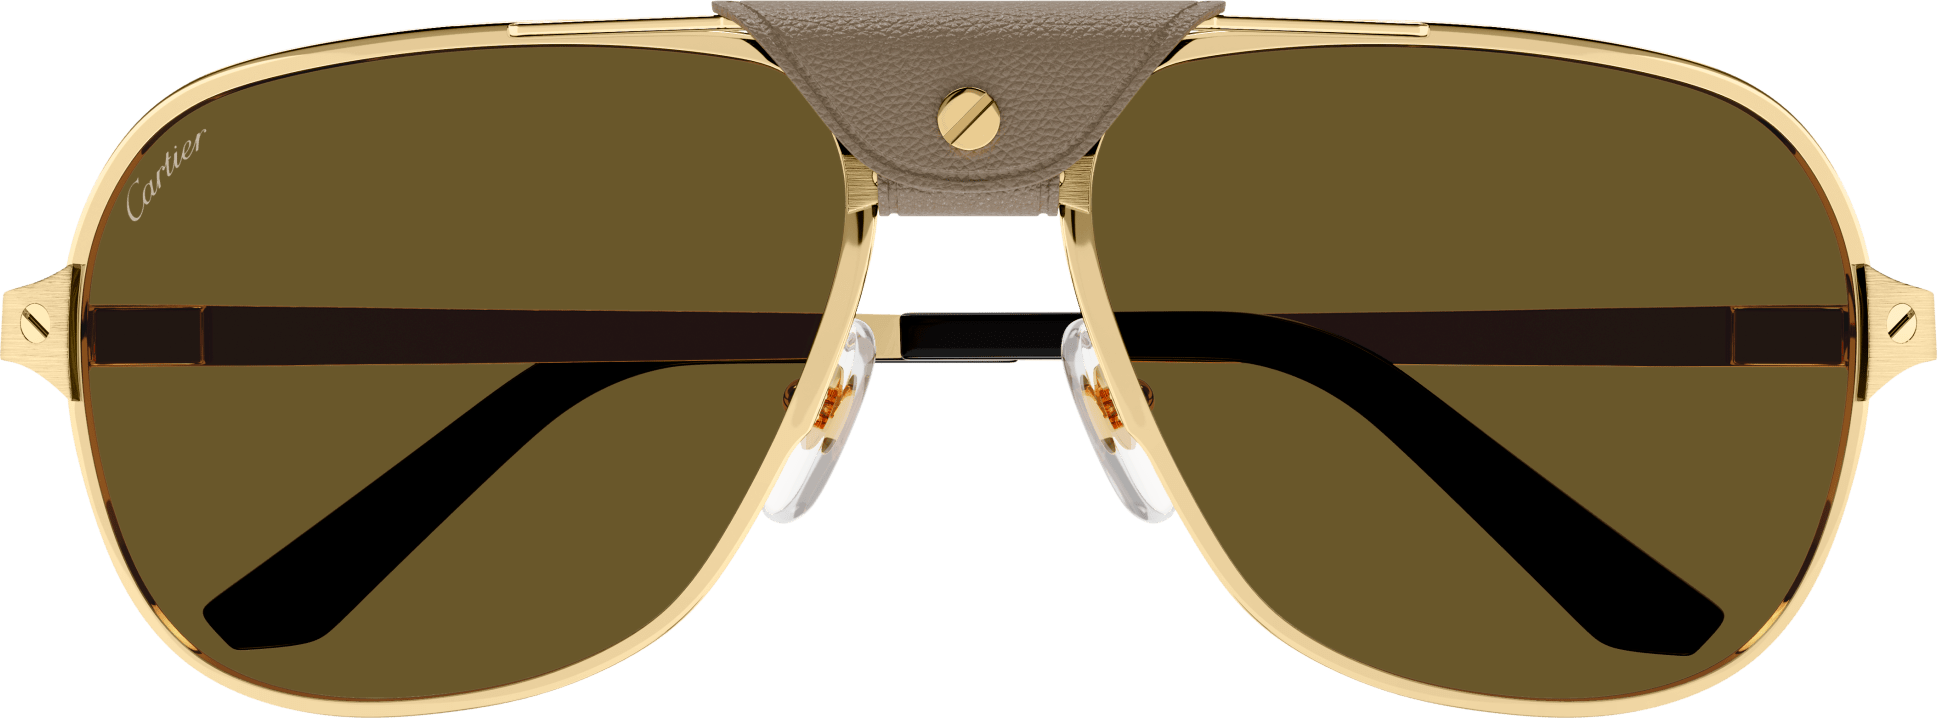 Color_CT0165S-011 - GOLD - BROWN - AR (ANTI REFLECTIVE) - POLARIZED